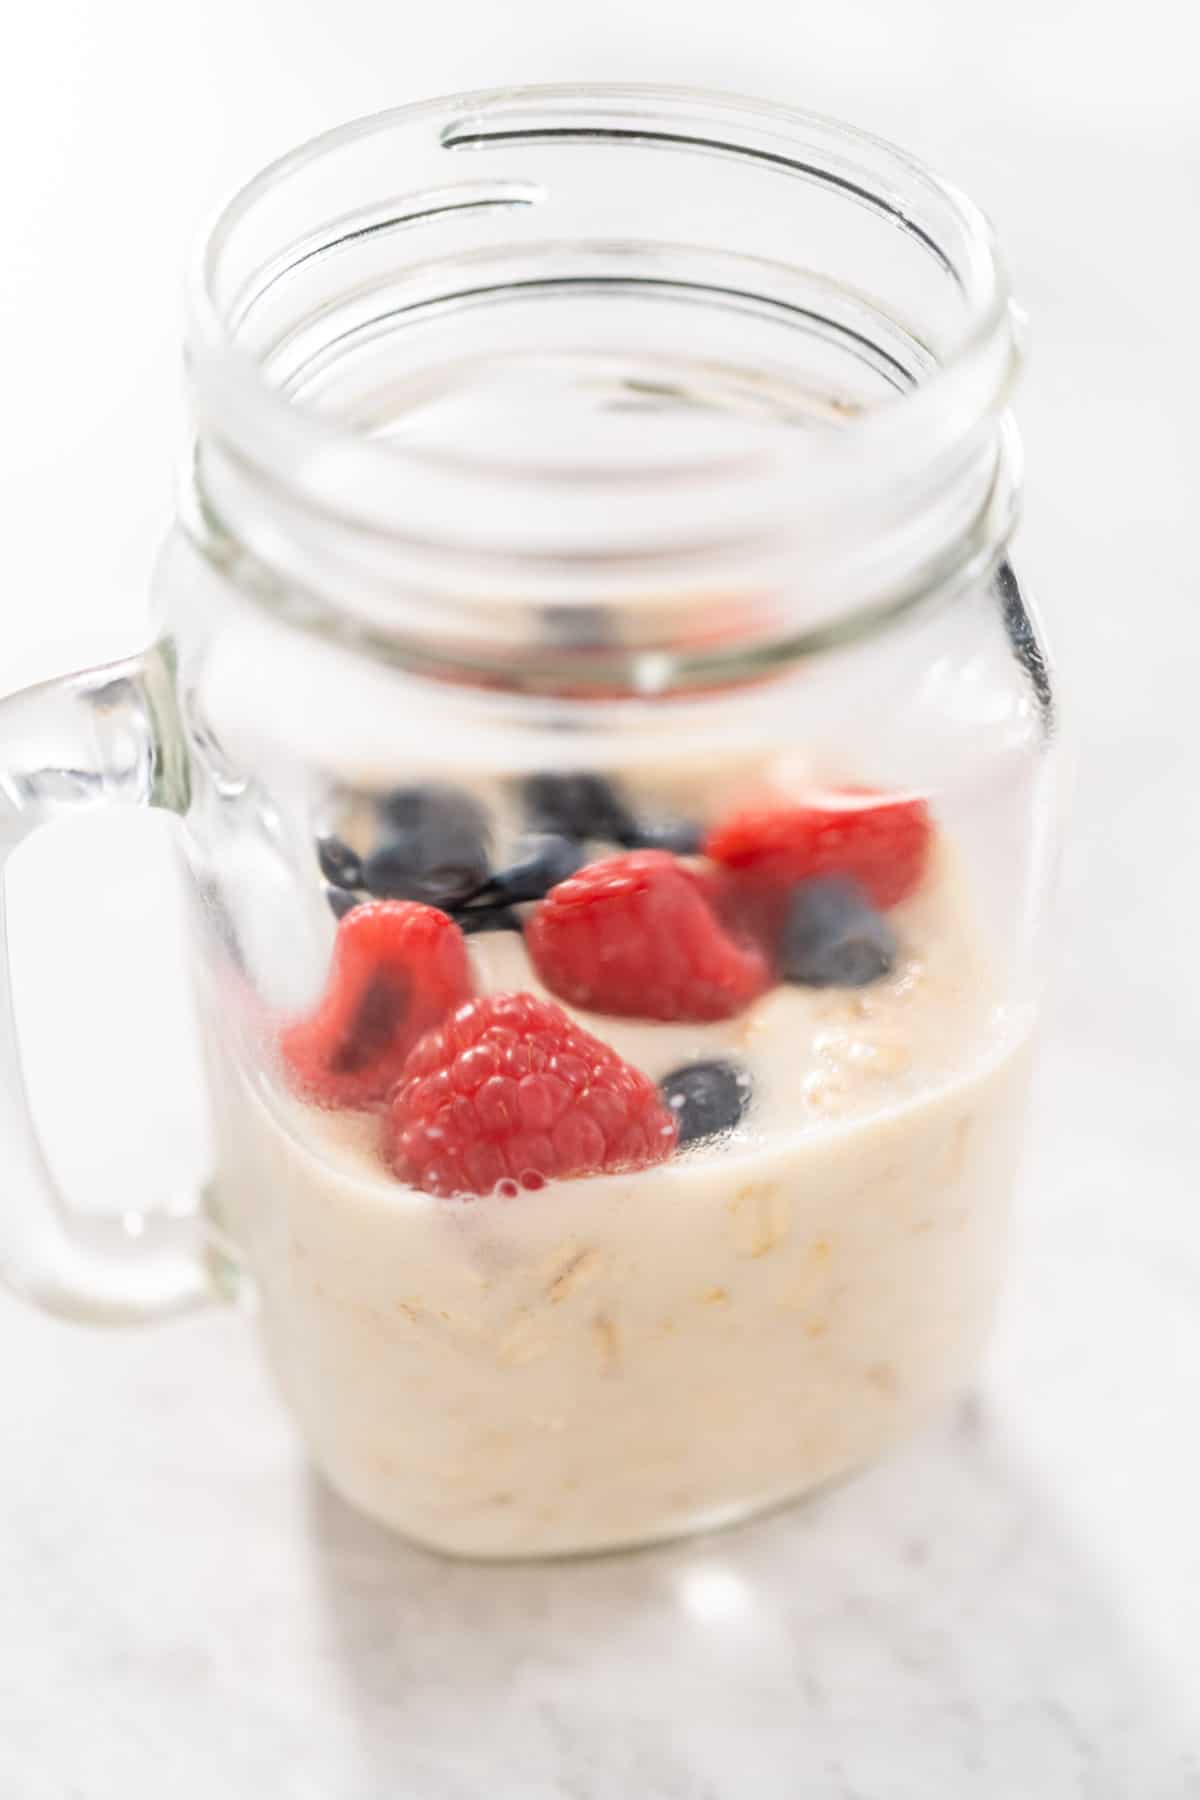 protein oats in a jar with fruit.